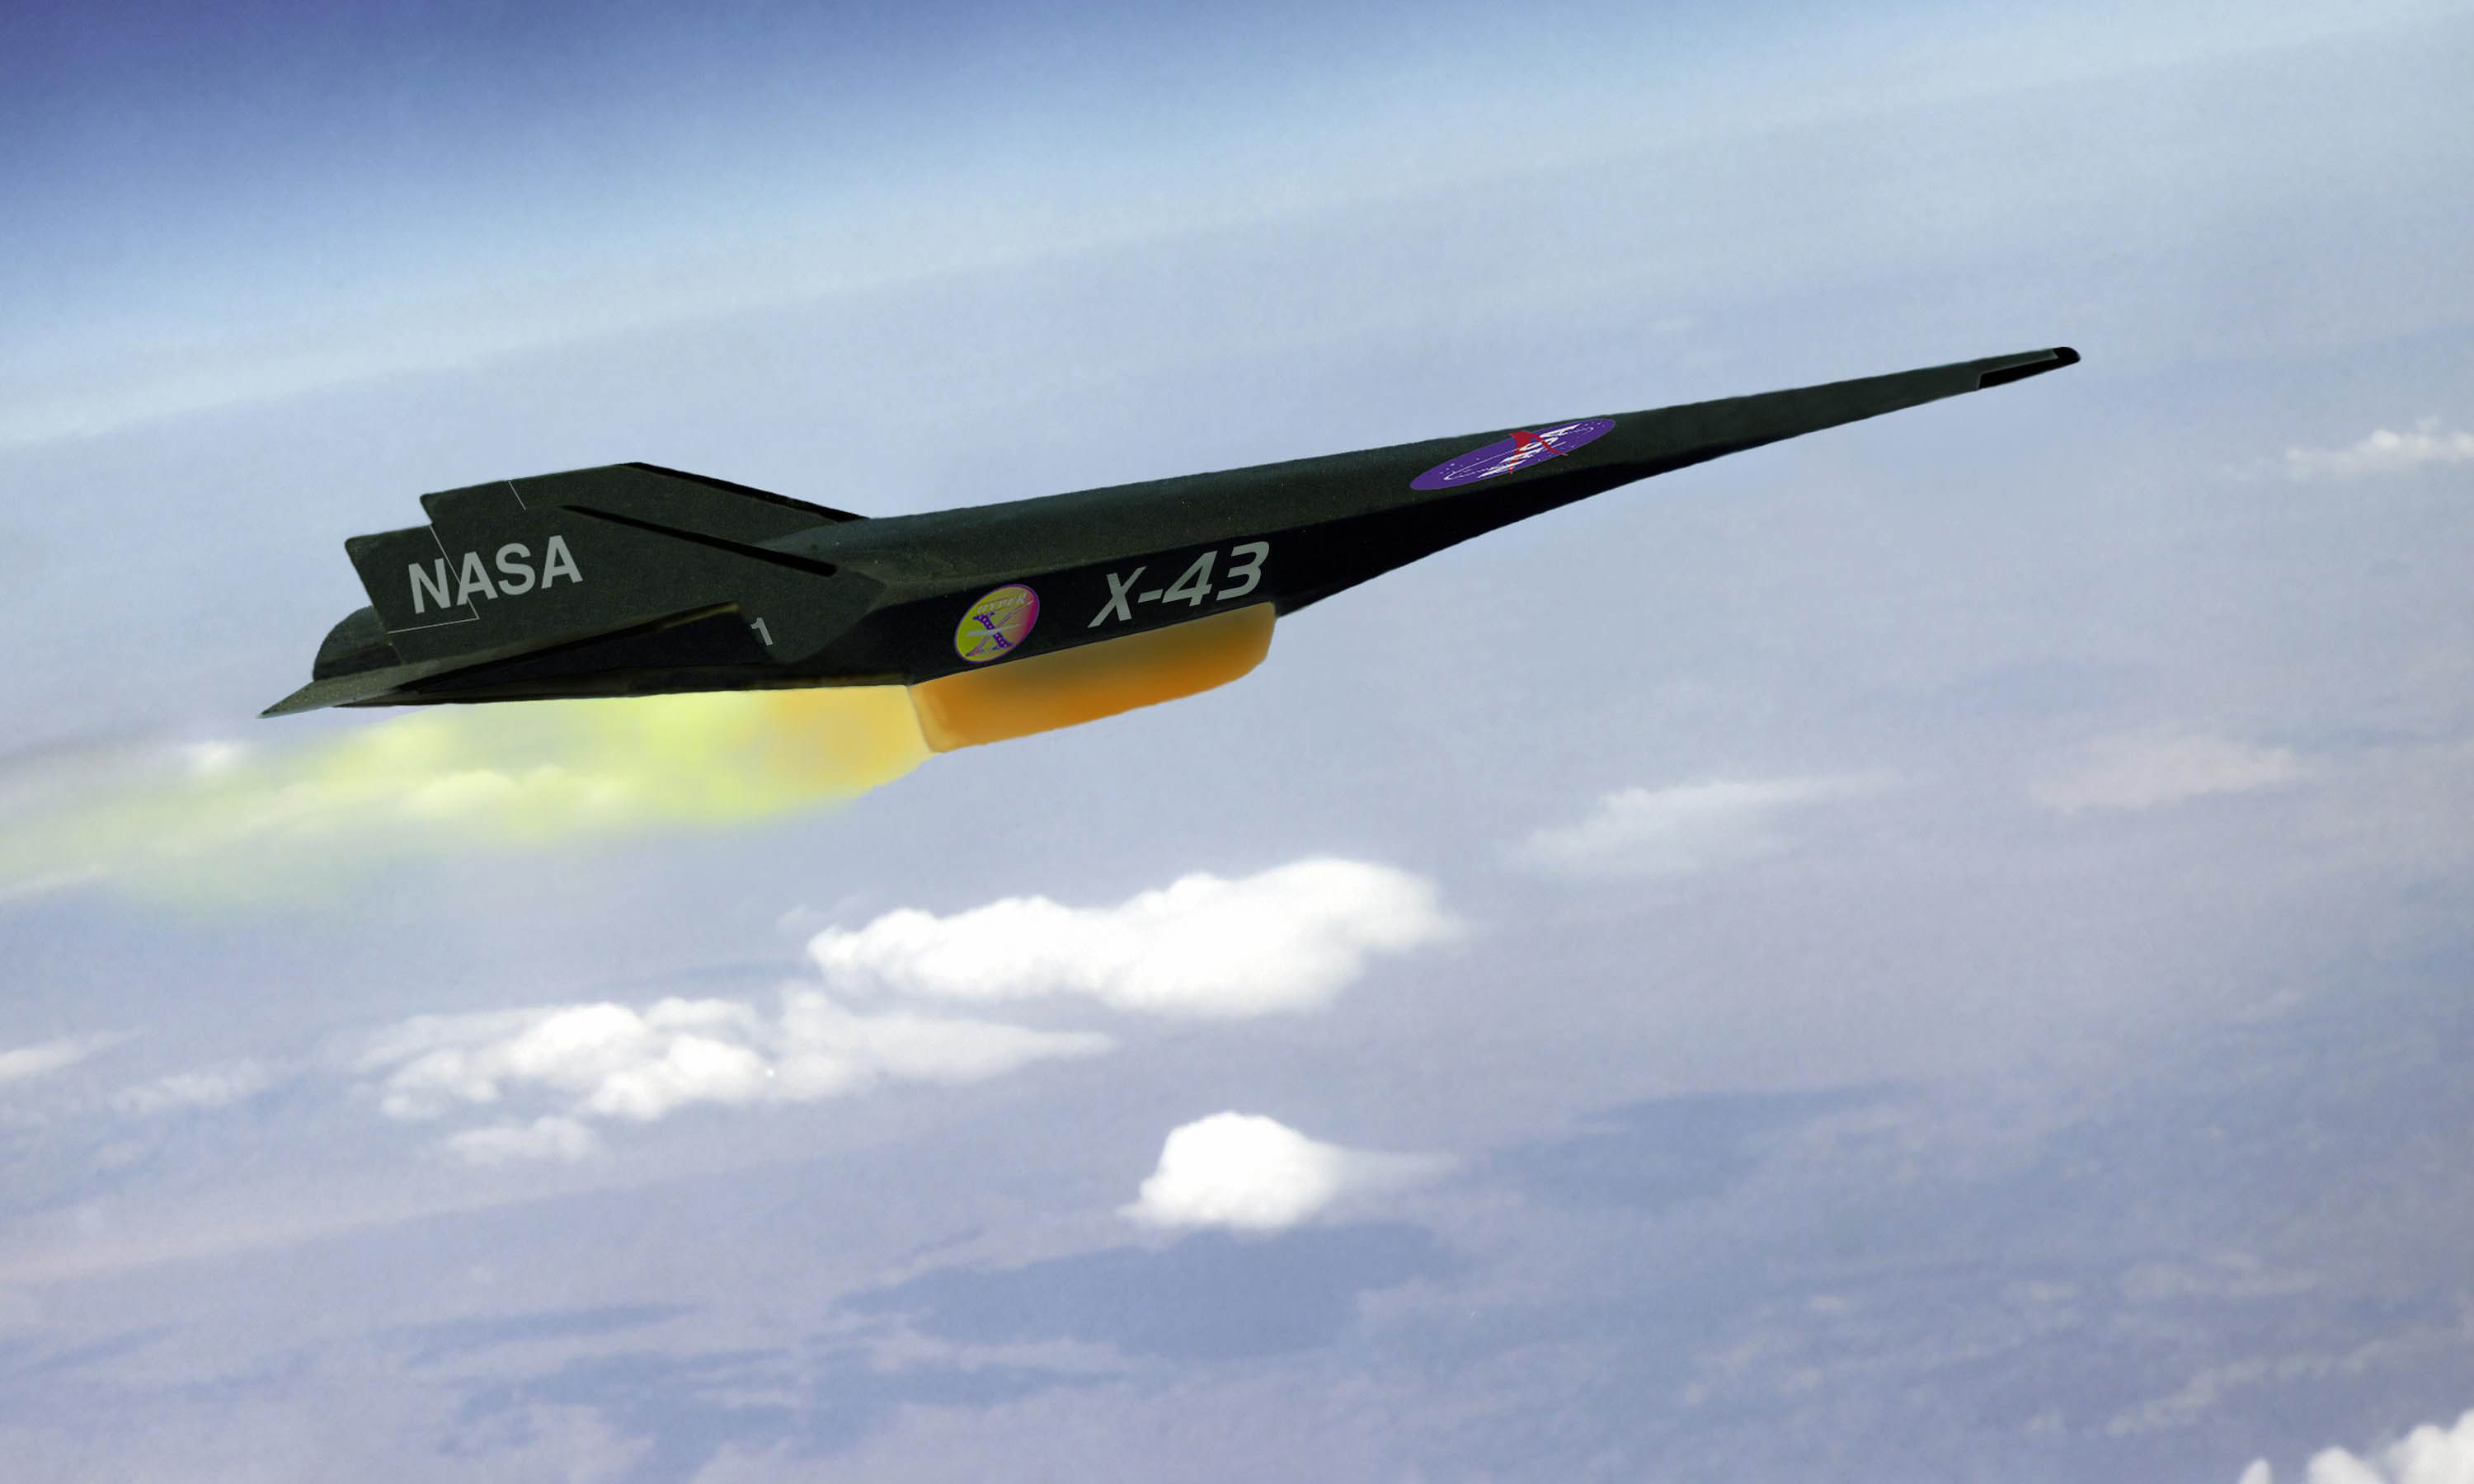 Graphic design image of the X-43A hypersonic research vehicle.